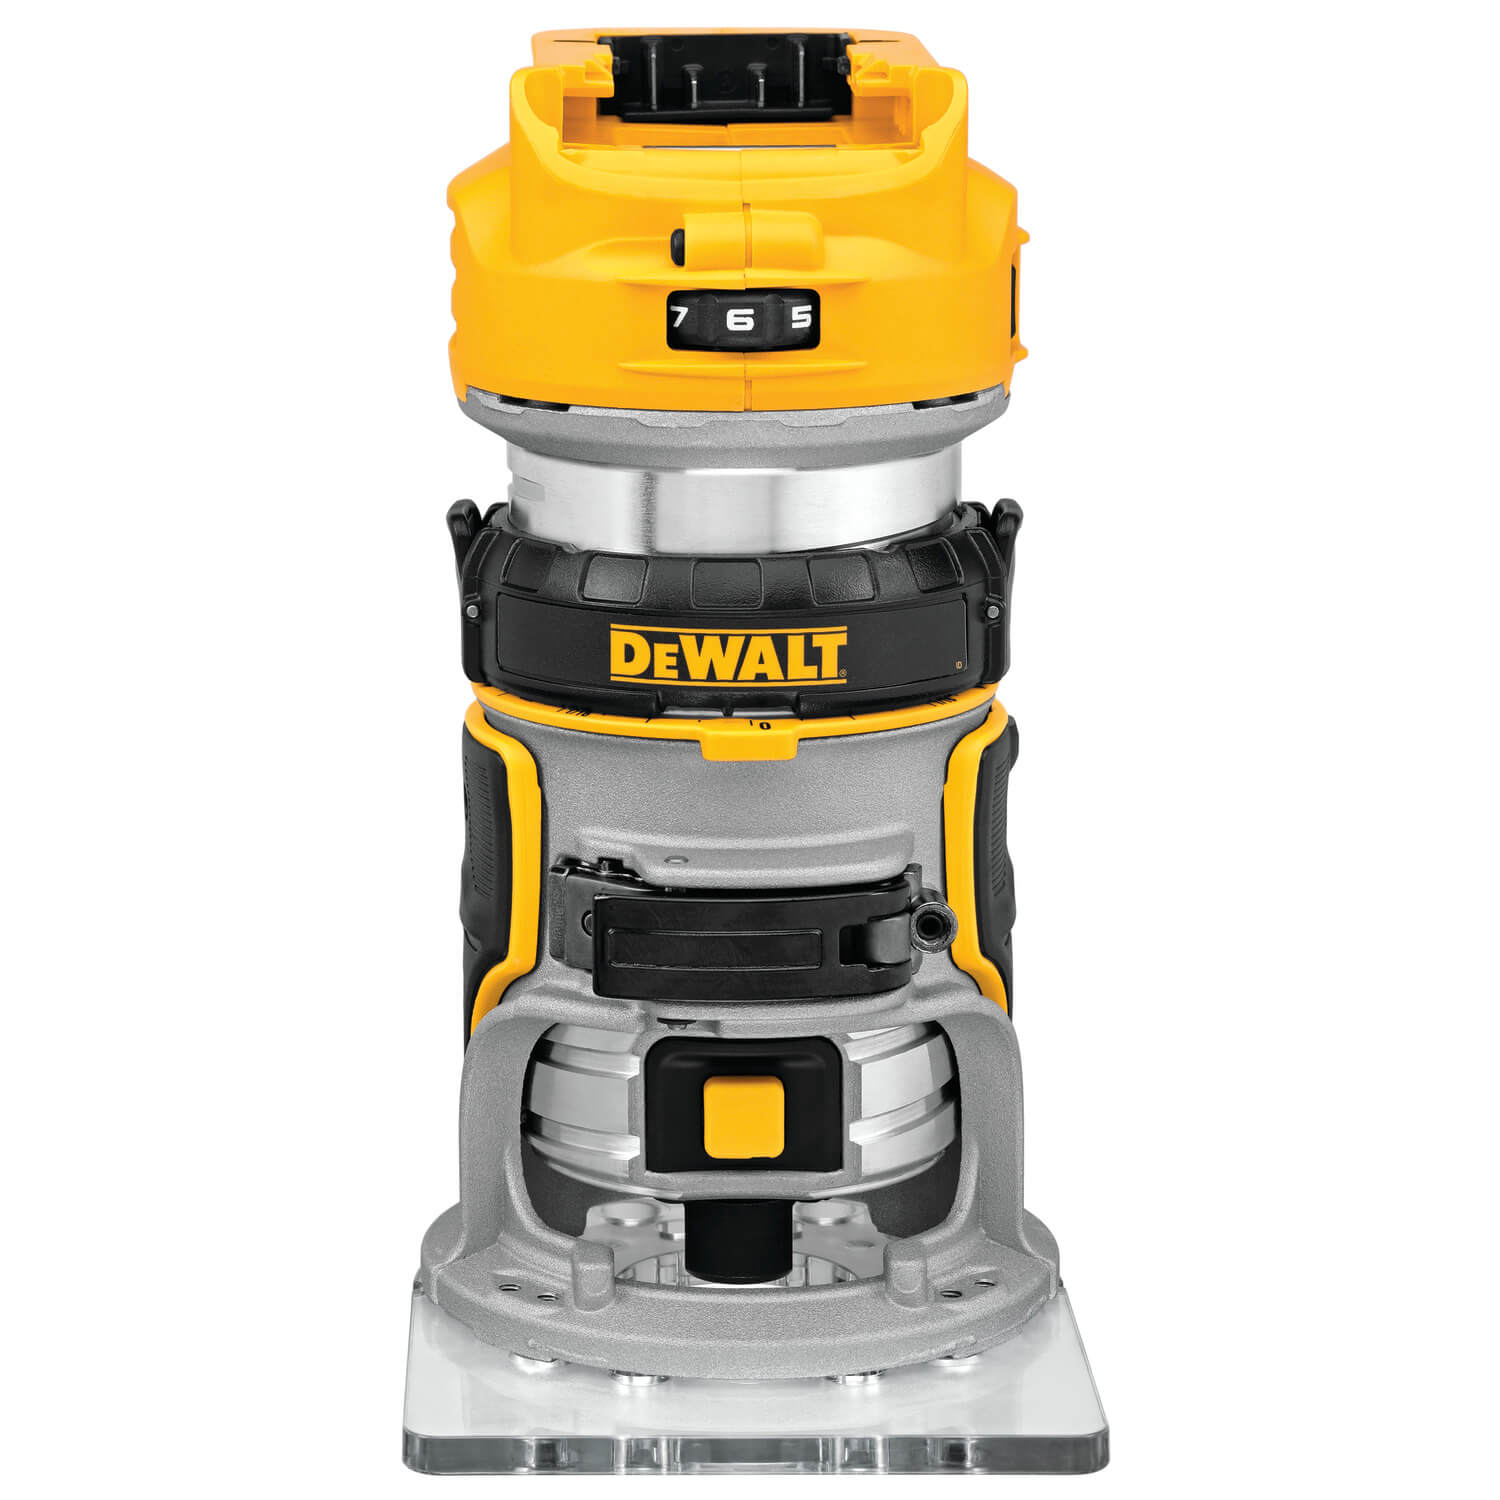 Dewalt DCW600B - 20V MAX COMPACT ROUTER - wise-line-tools